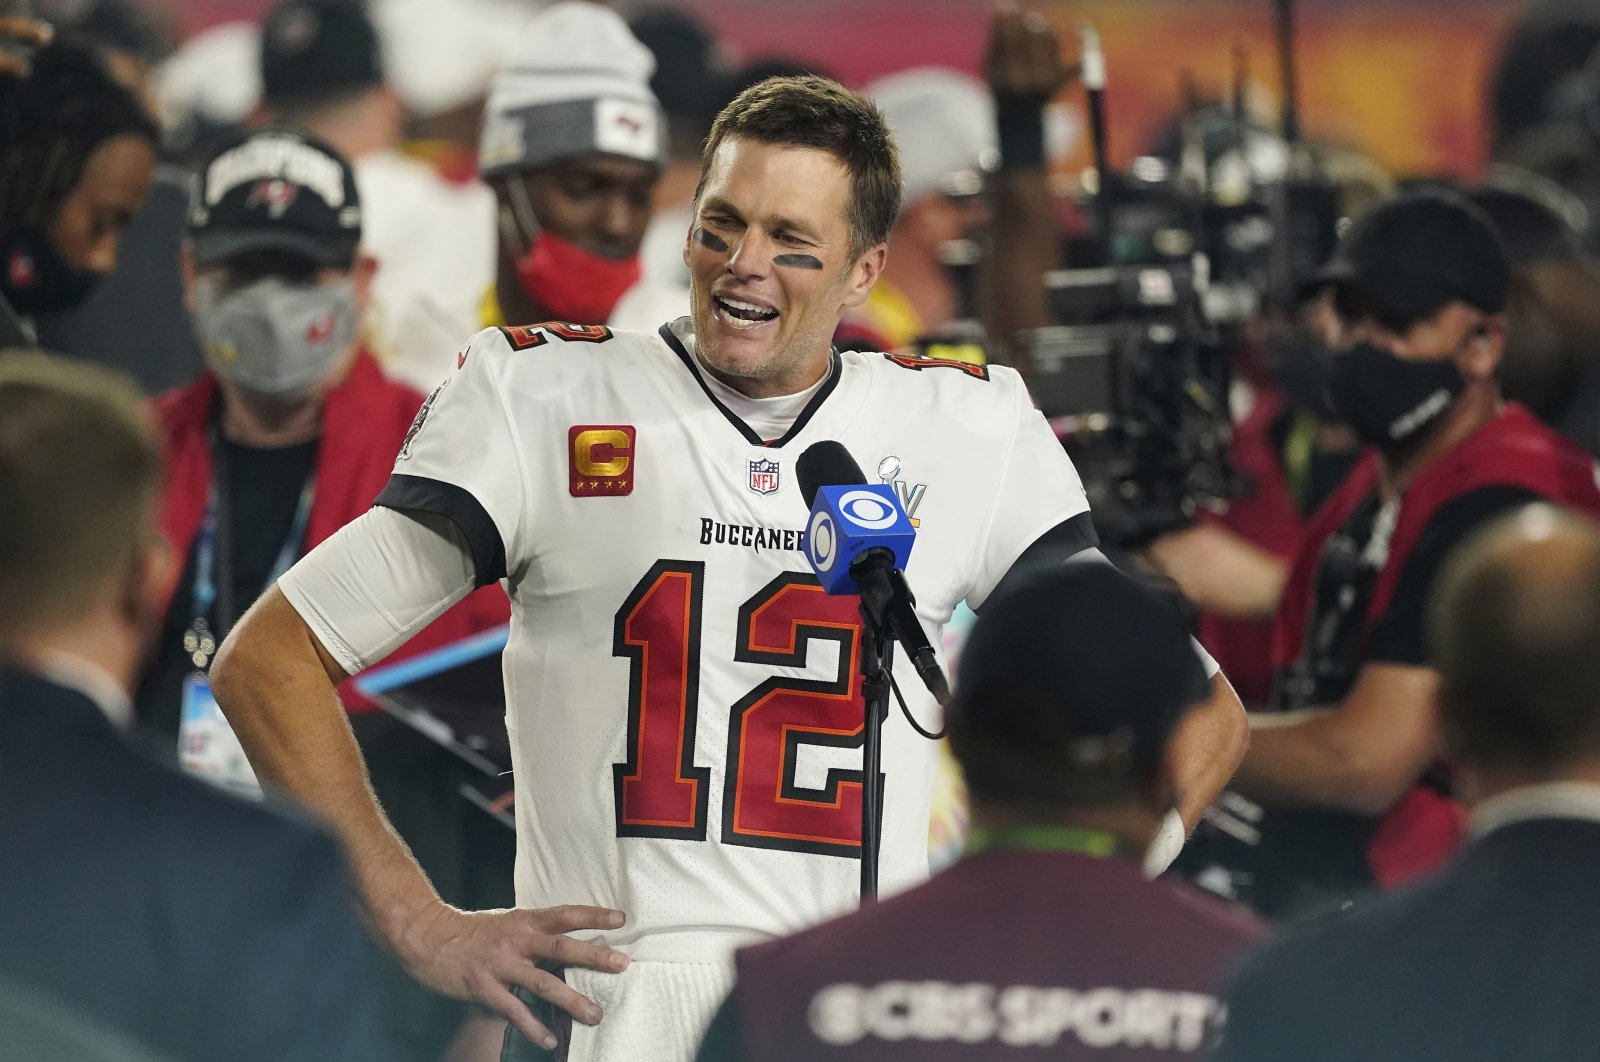 Tampa Bay Buccaneers quarterback Tom Brady (C) speaks after the NFL Super Bowl 55 against the Kansas City Chiefs, in Tampa, Florida, U.S., Feb. 7, 2021. (AP Photo)